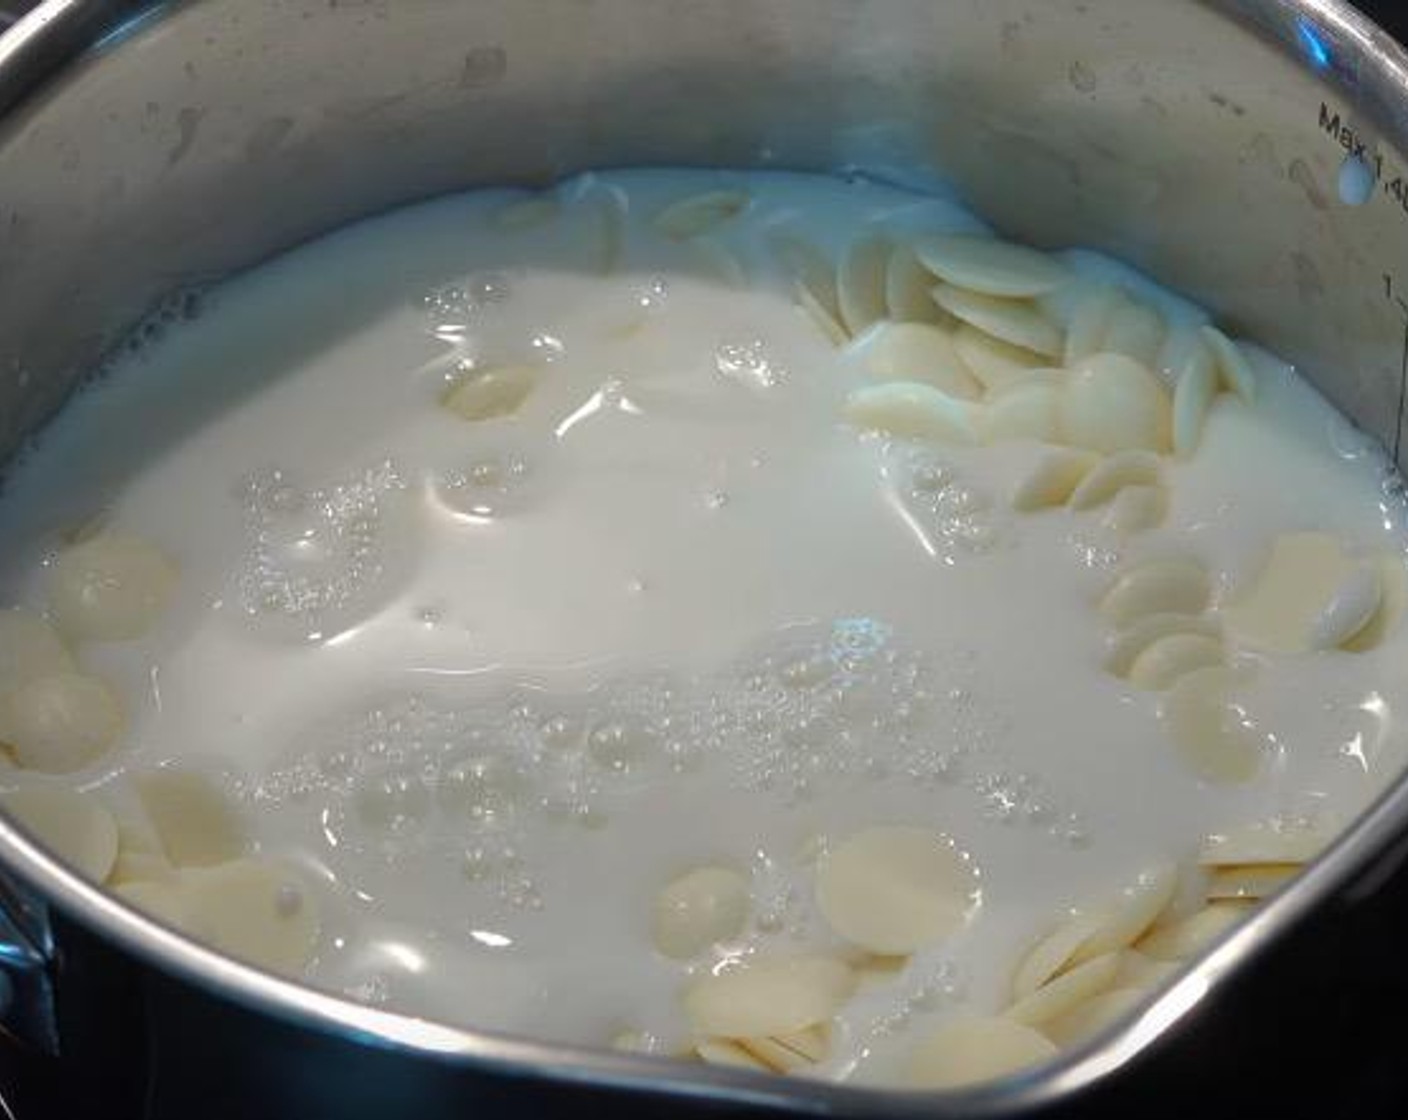 step 2 In a small saucepan on low heat, combine White Chocolate (1 cup) and Milk (1 1/2 cups). Stir until the mixture is smooth. Set aside to cool.